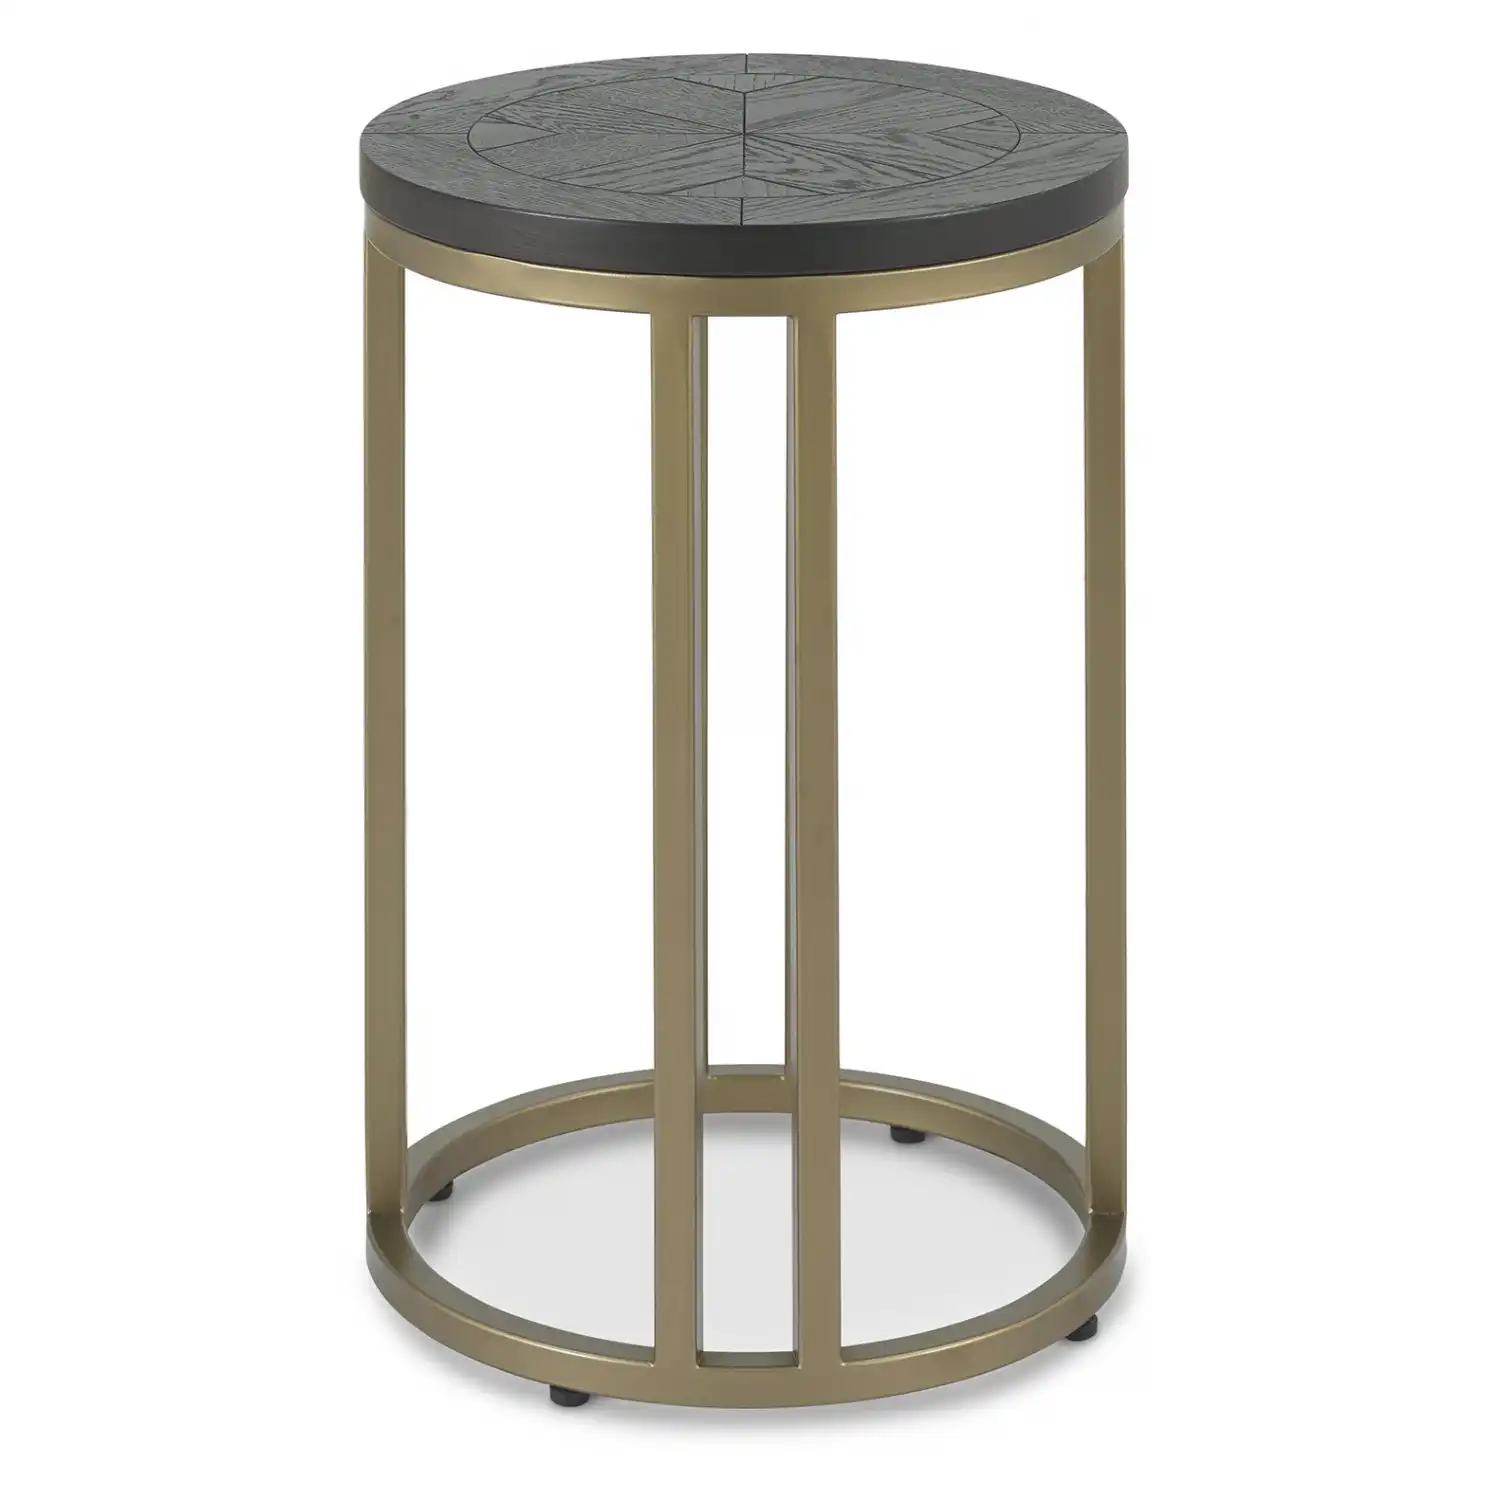 Gothic Steel and Brass Drinks Table